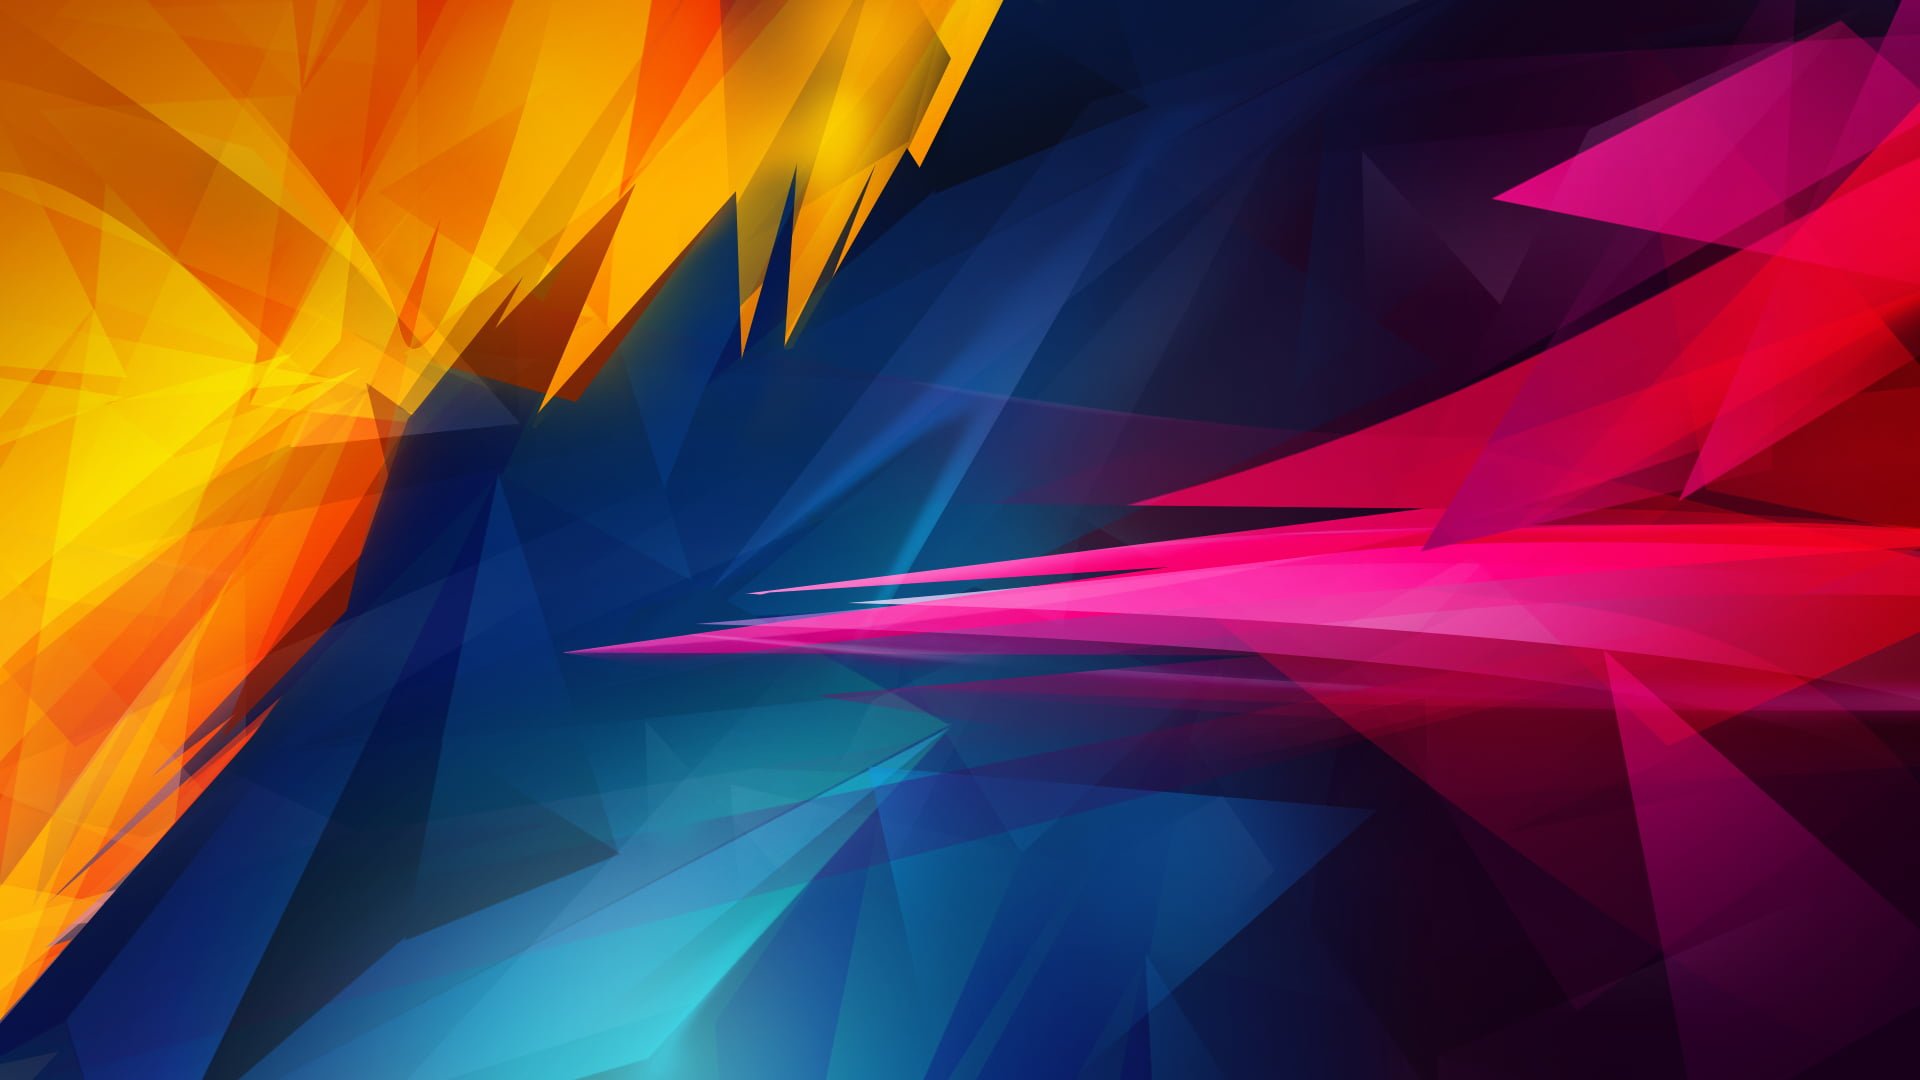 Blue, yellow, and pink abstract wallpaper, digital art, purple • Wallpaper For You HD Wallpaper For Desktop & Mobile